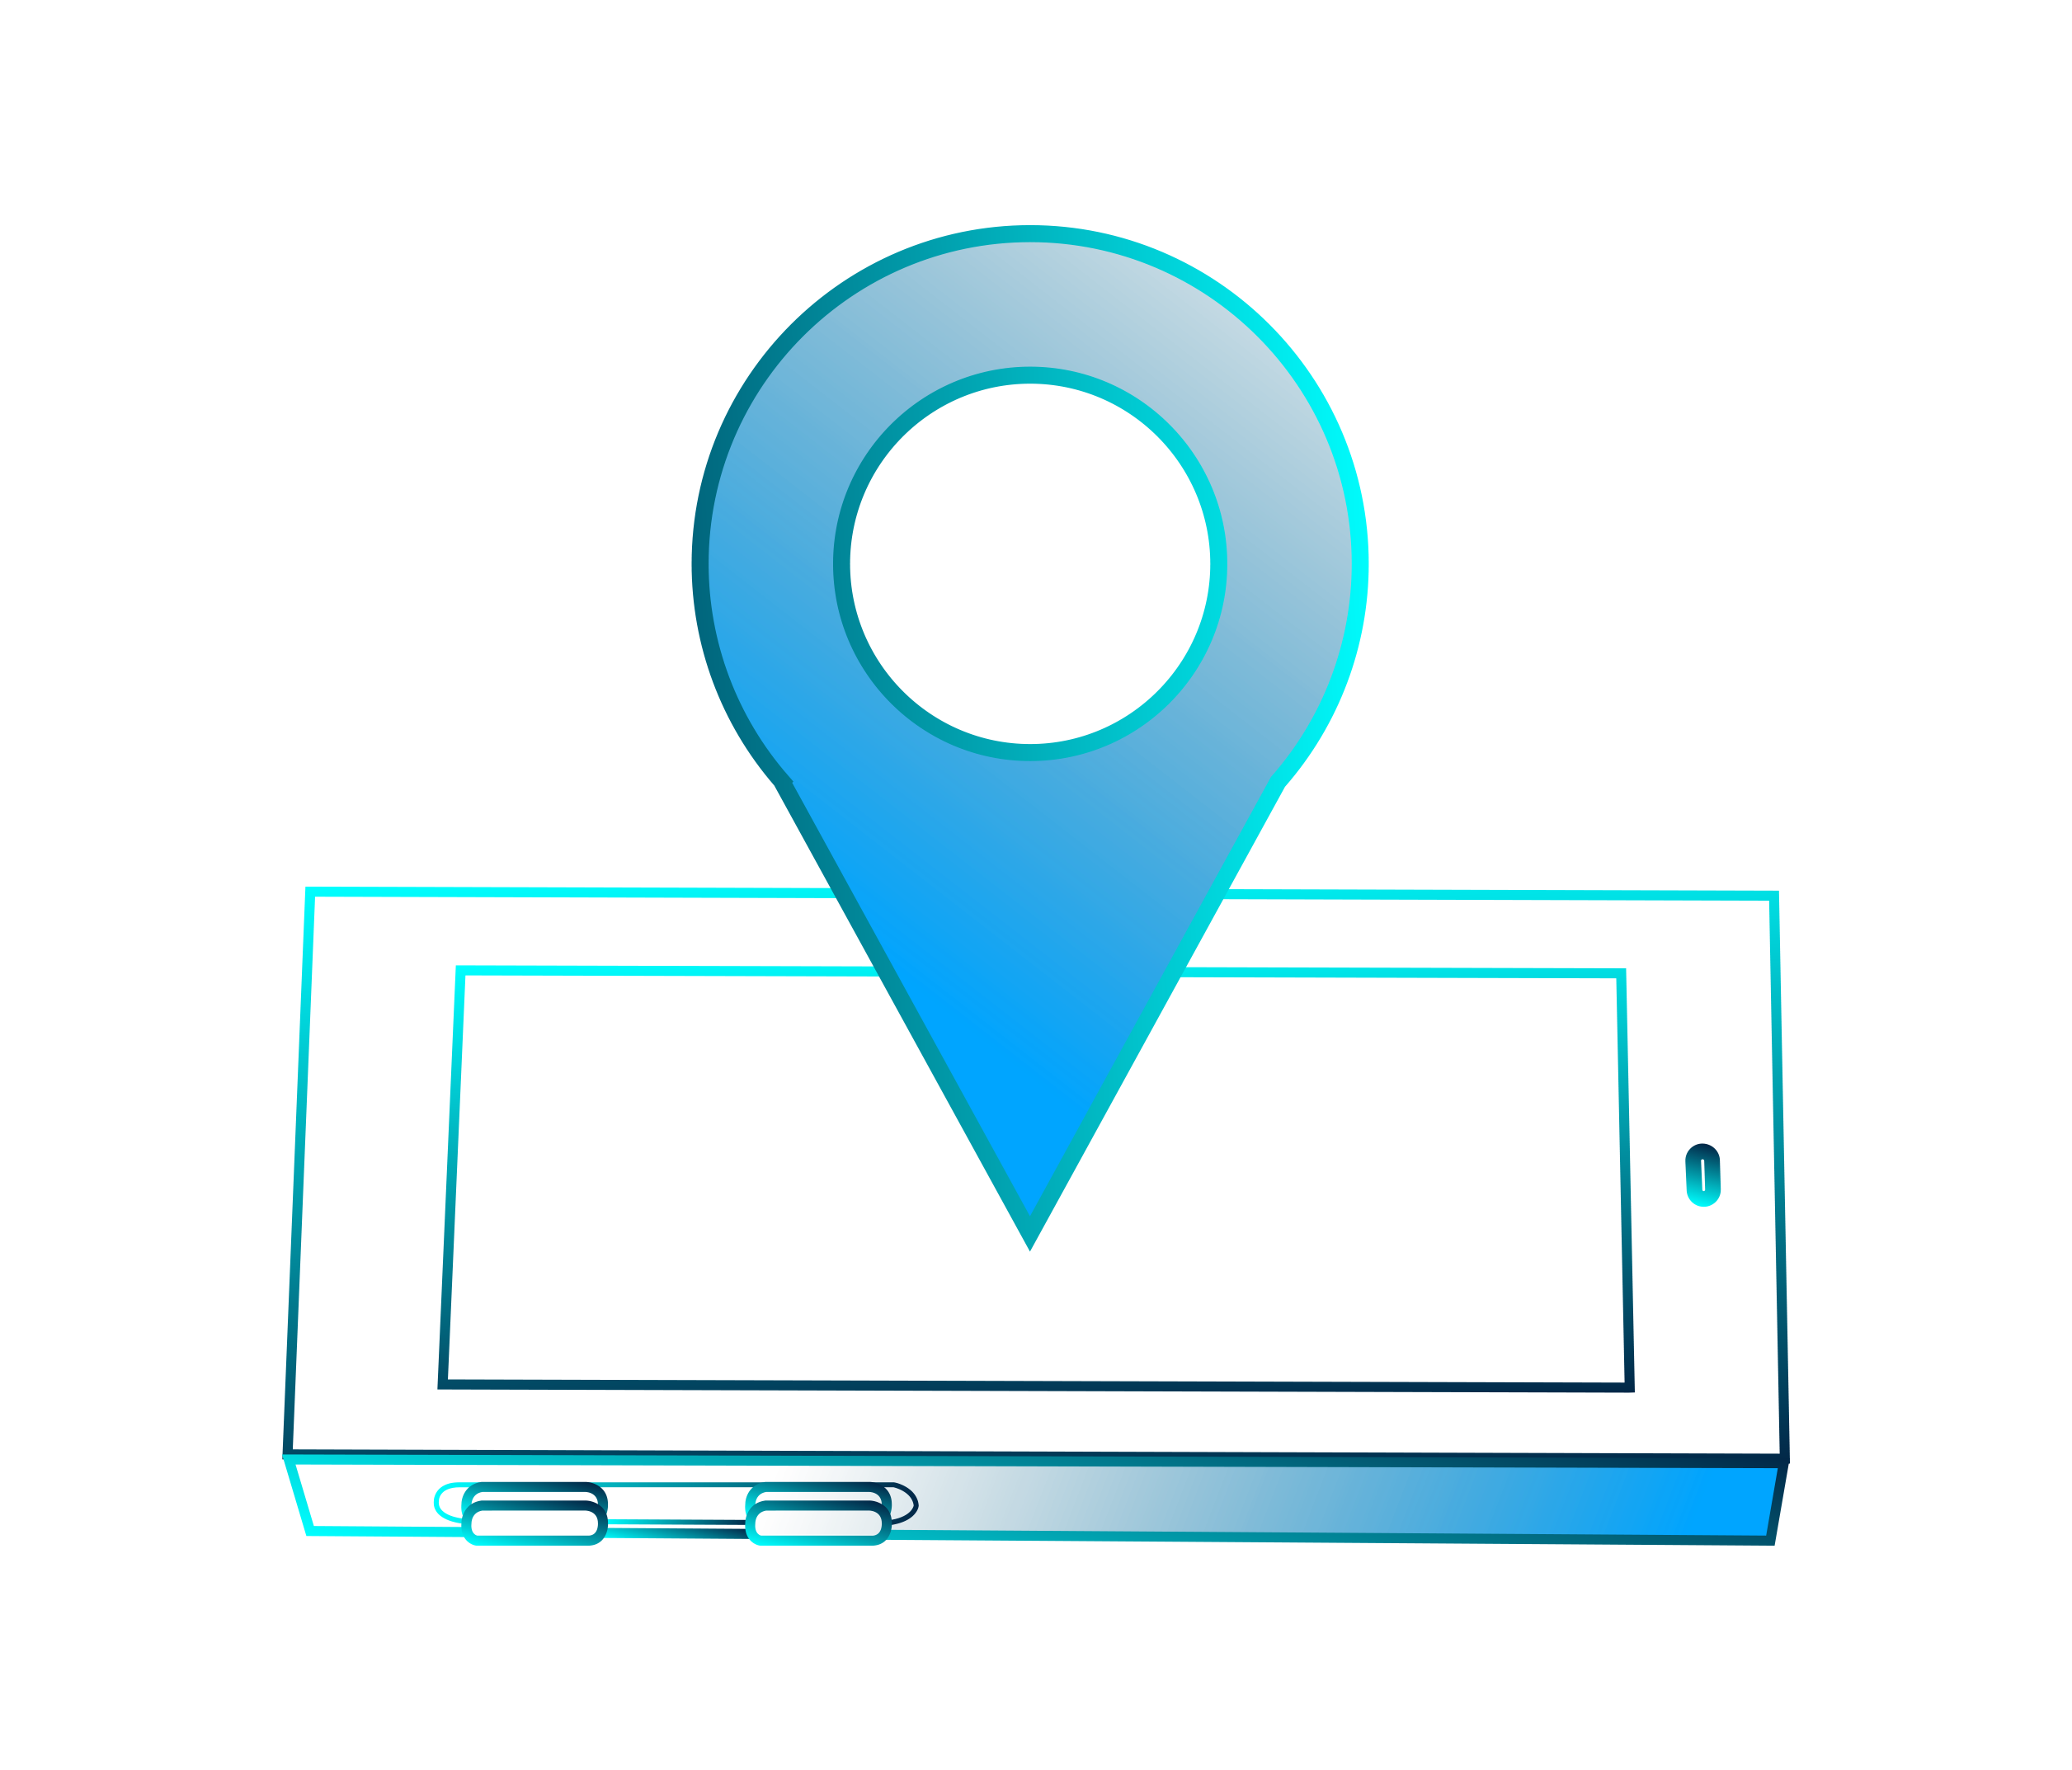 SOLUM Newton - Location Based Service (LBS) Feature